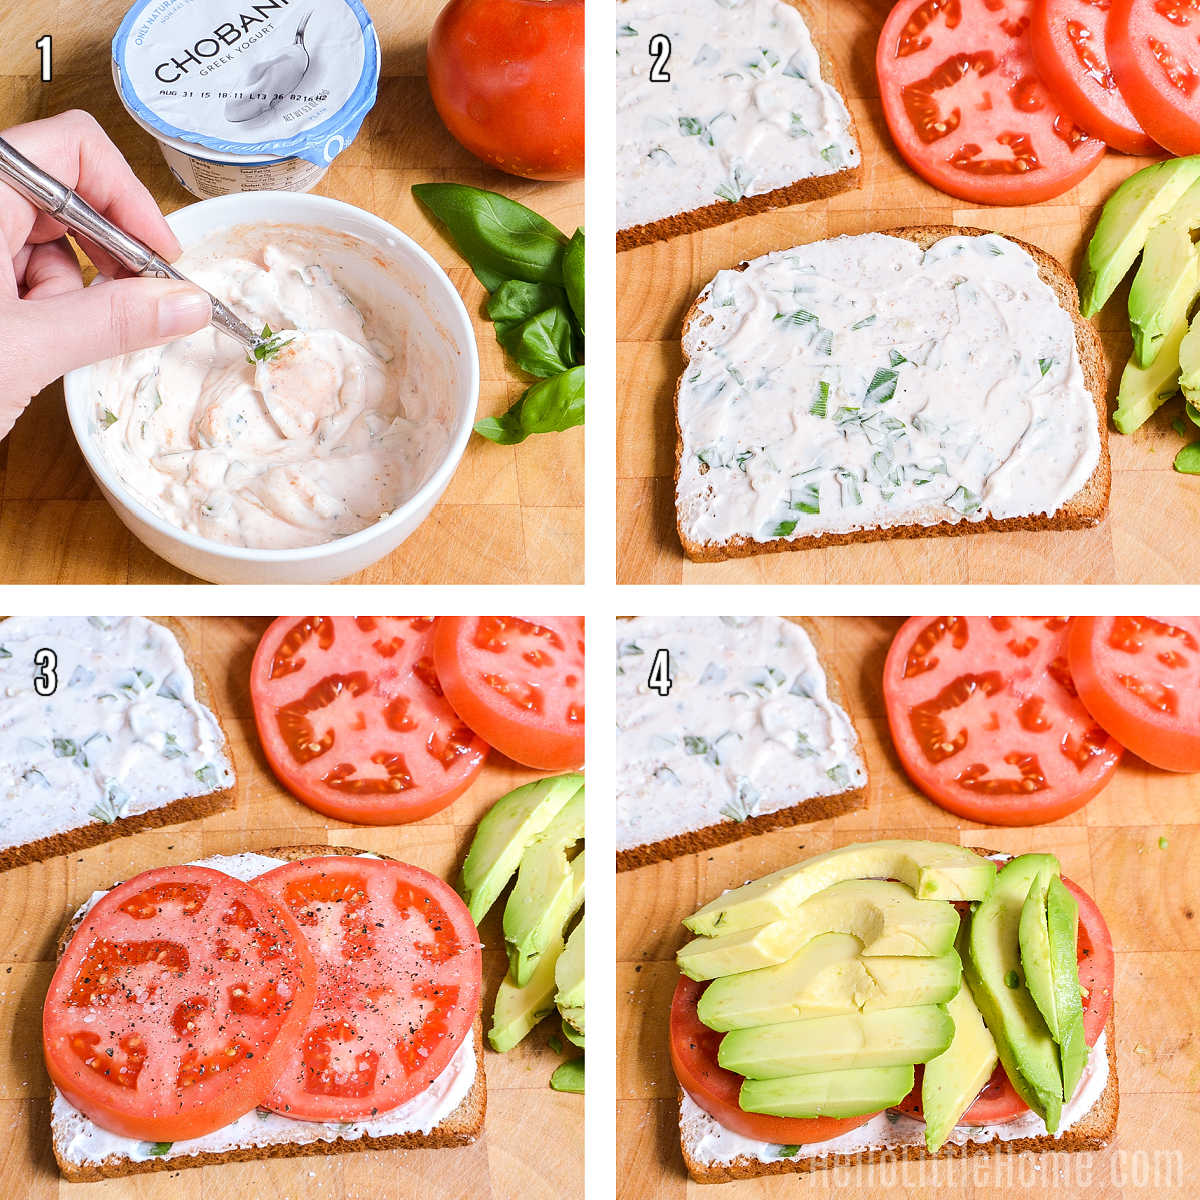 A photo collage showing how to make a Tomato Avocado Sandwich step by step.